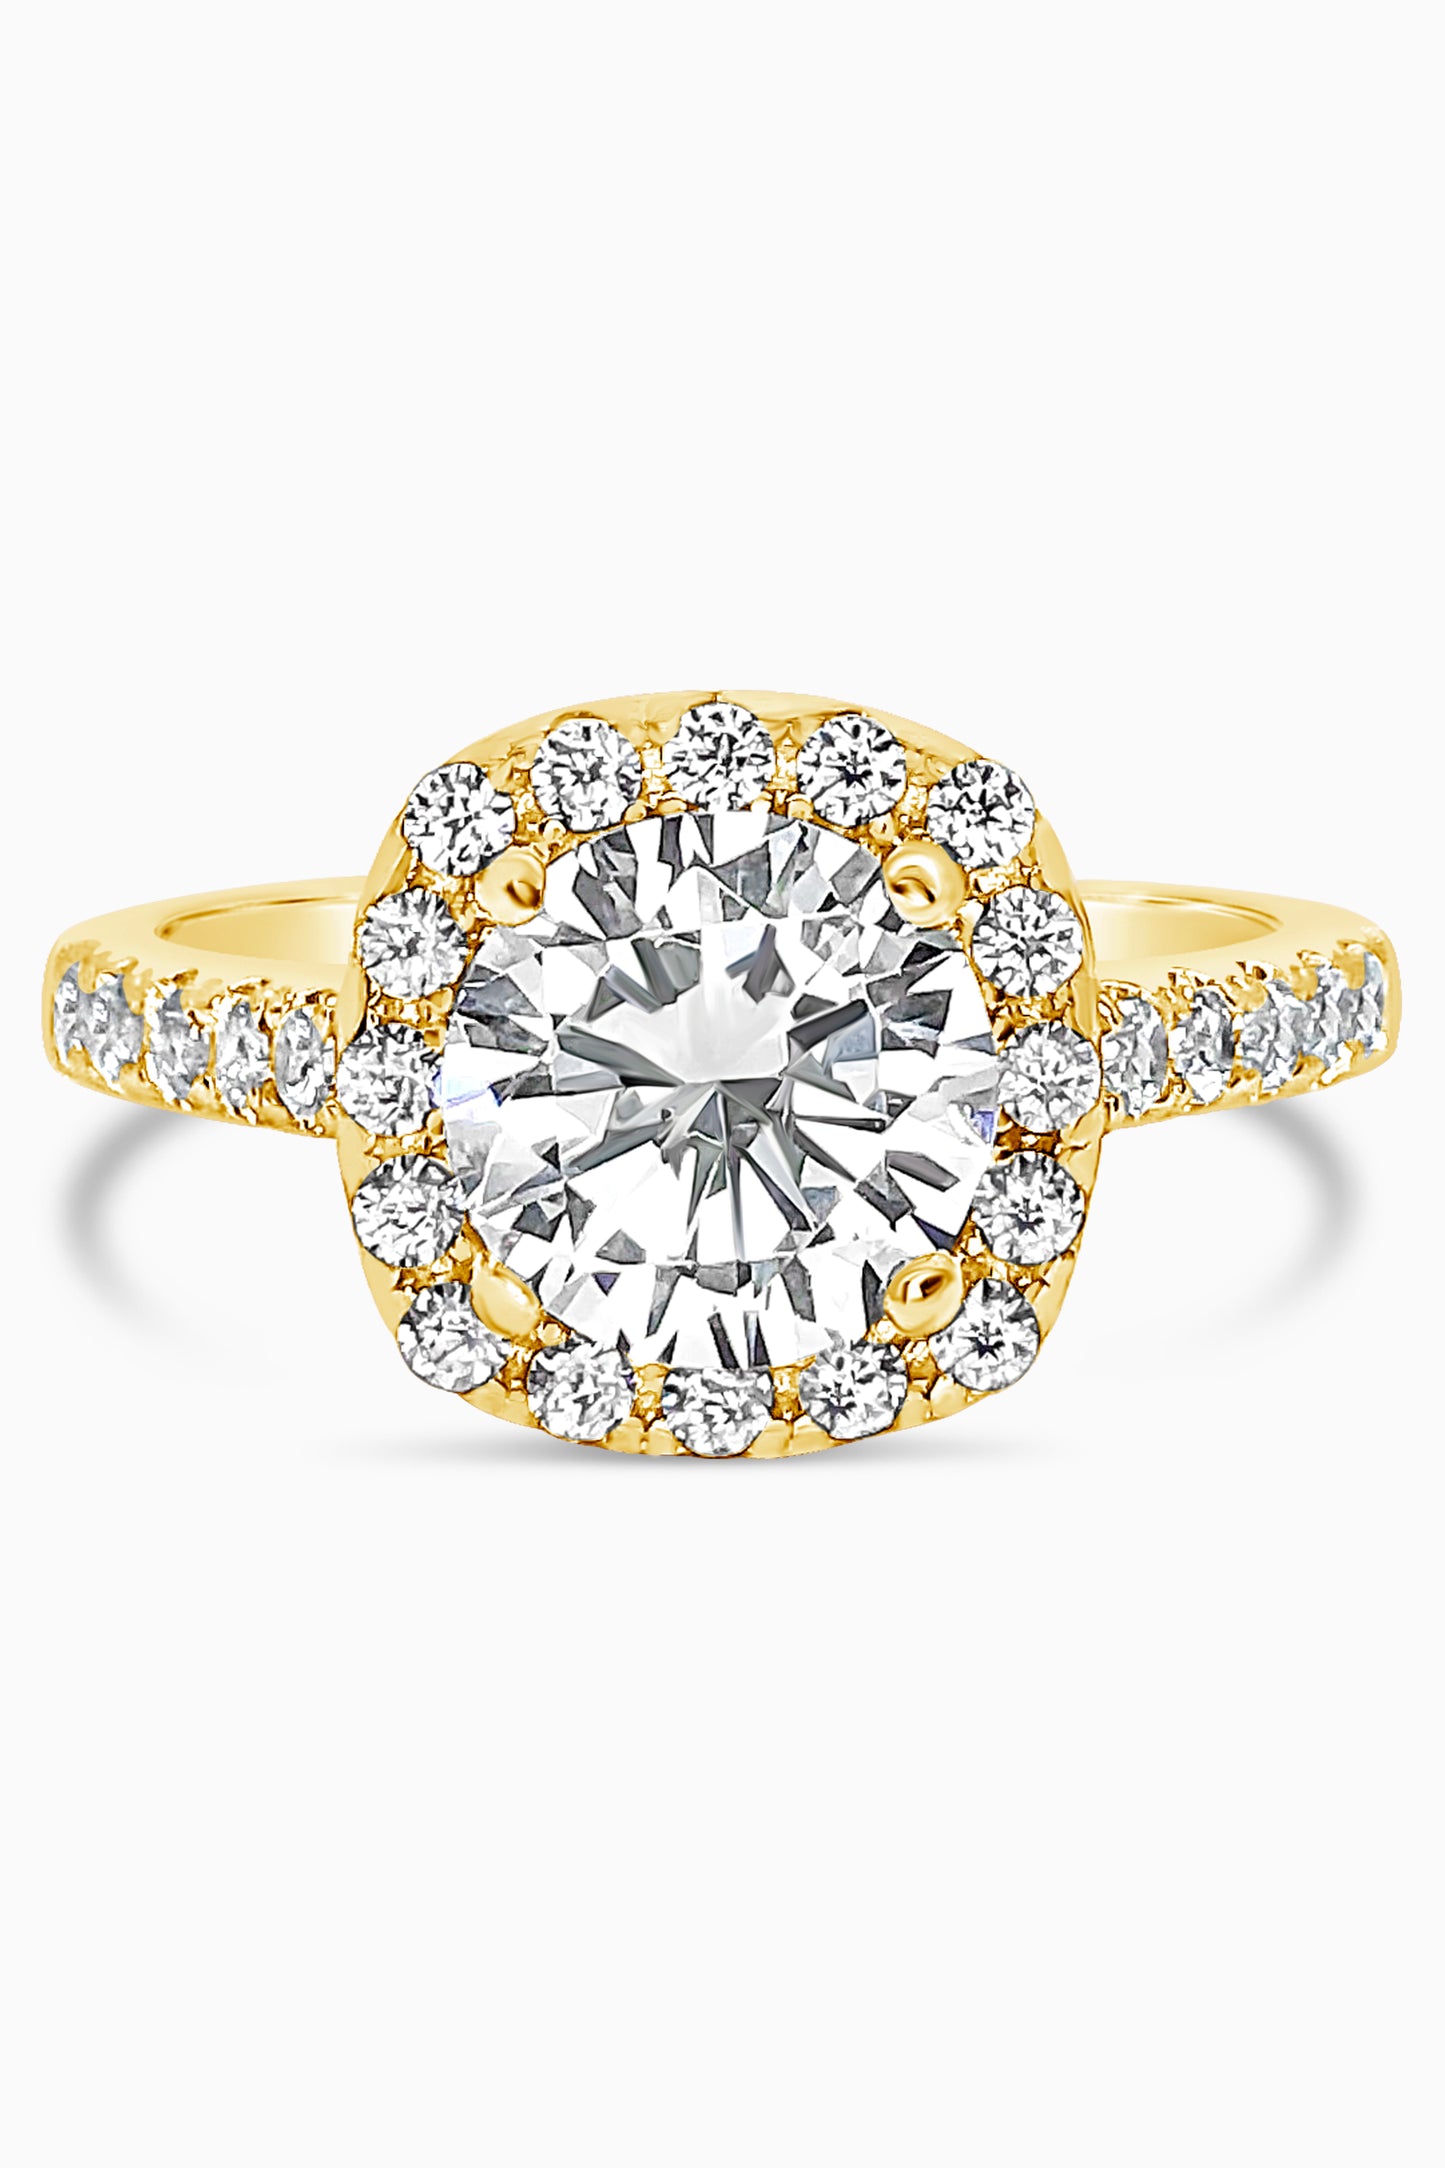 Yellow Gold round cut stone surrounded by a Square Halo and Pavé band